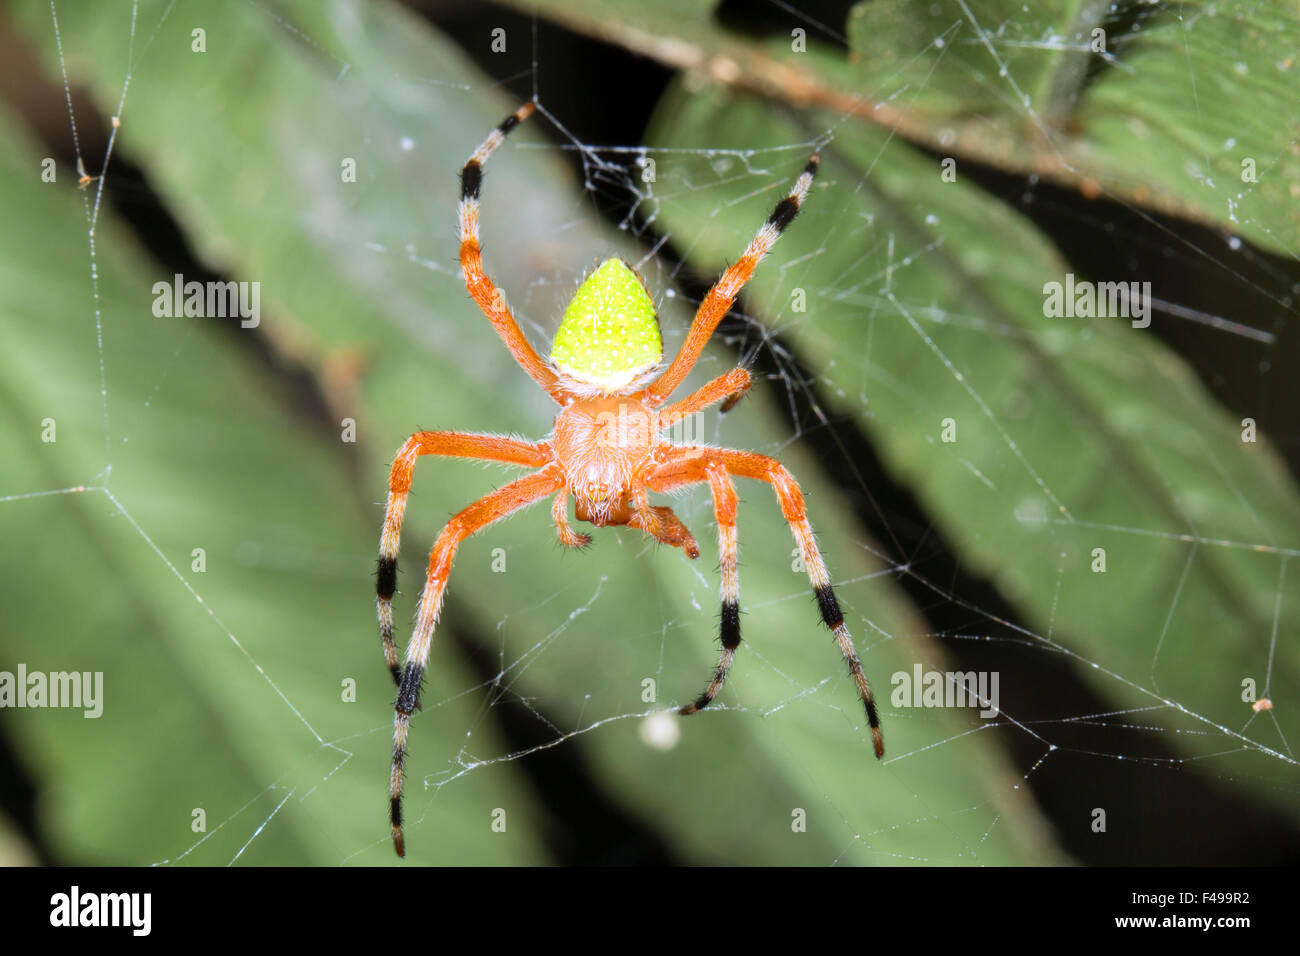 Brightly coloured spider in a web in the rainforest, Ecuador Stock Photo